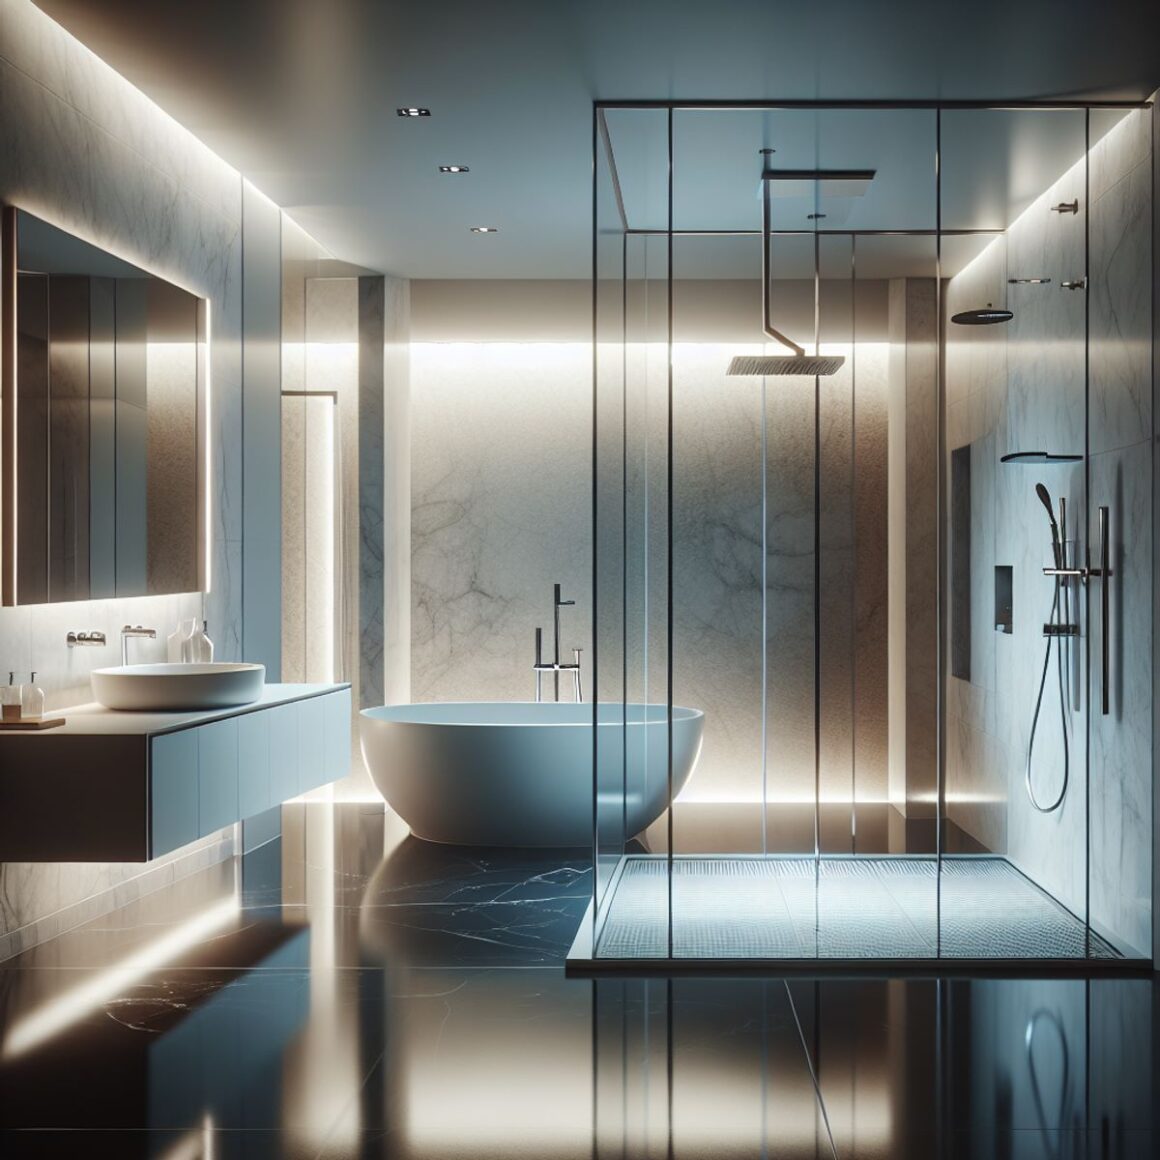 A modern bathroom with polished fixtures, a glass shower enclosure, a freestanding bathtub, a marble floor, and abstract artwork on the walls.